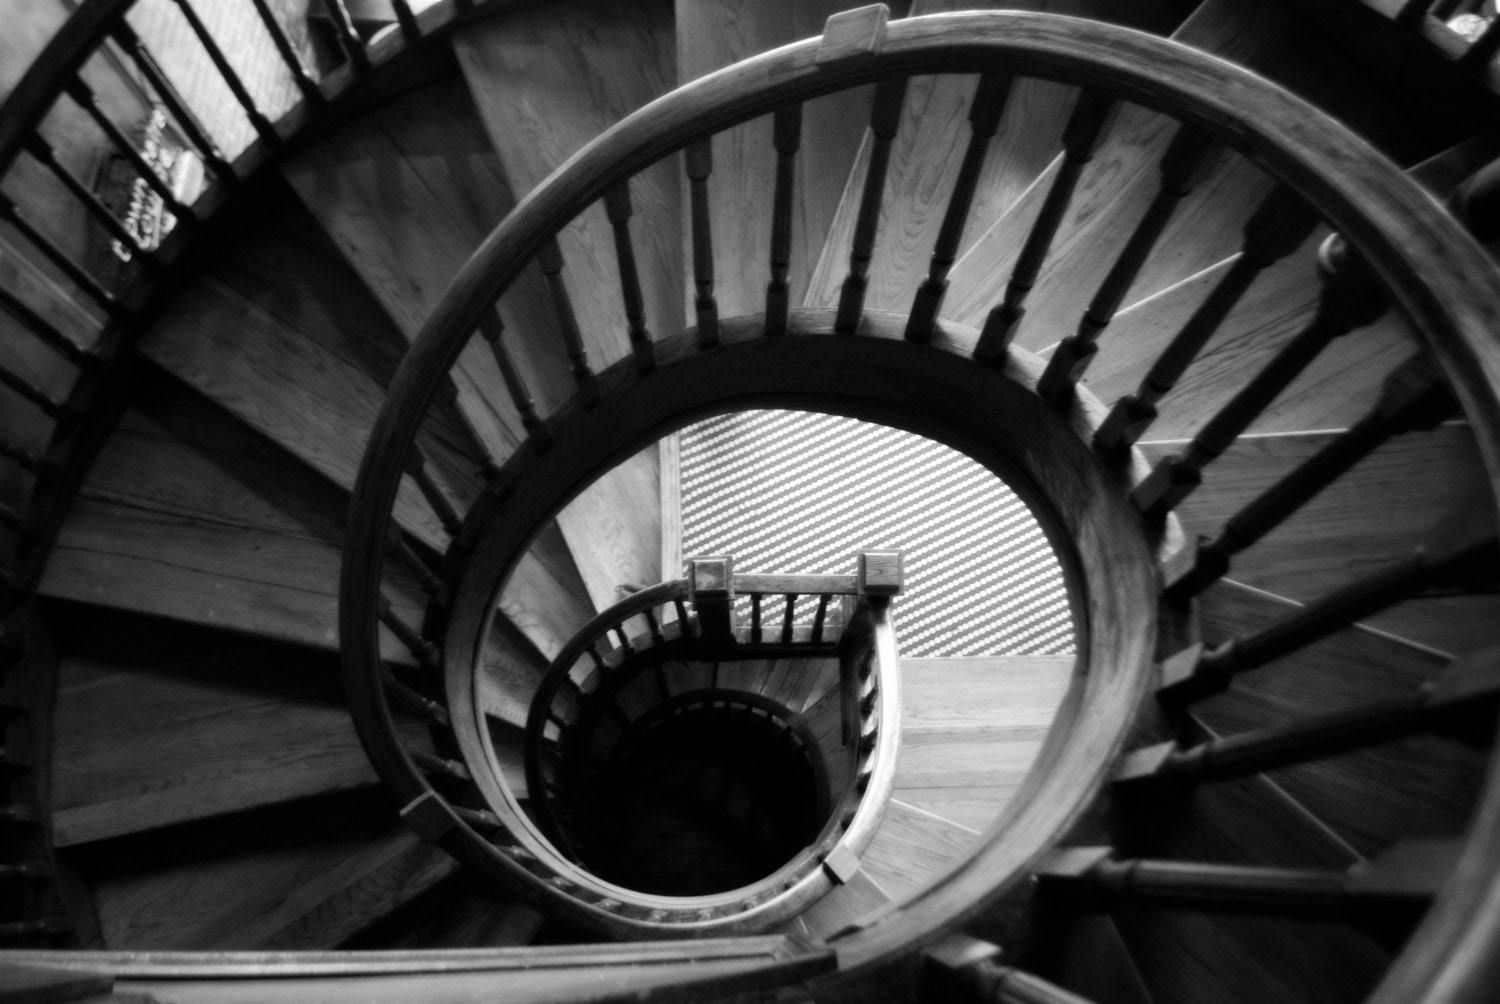 Black and white spiral staircase - RWOODSUMphotography